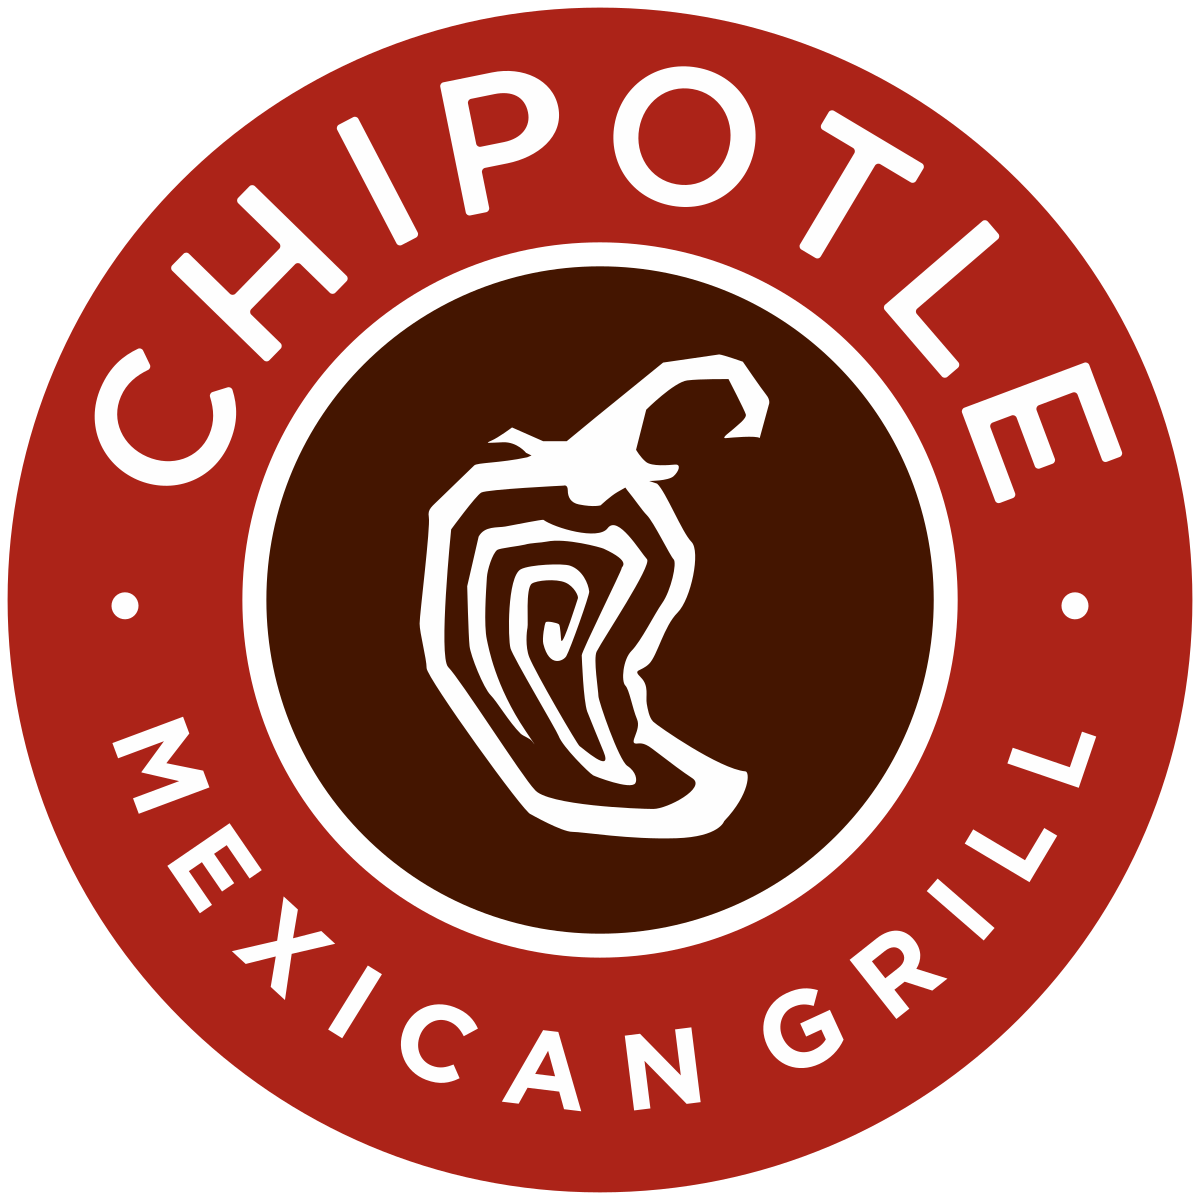 National Burrito Day: Chipotle giving away 10,000 Free Burritos on Thurs April 6, 2023 via Twitter and 20,000 with $20+ Purchase on Grubhub